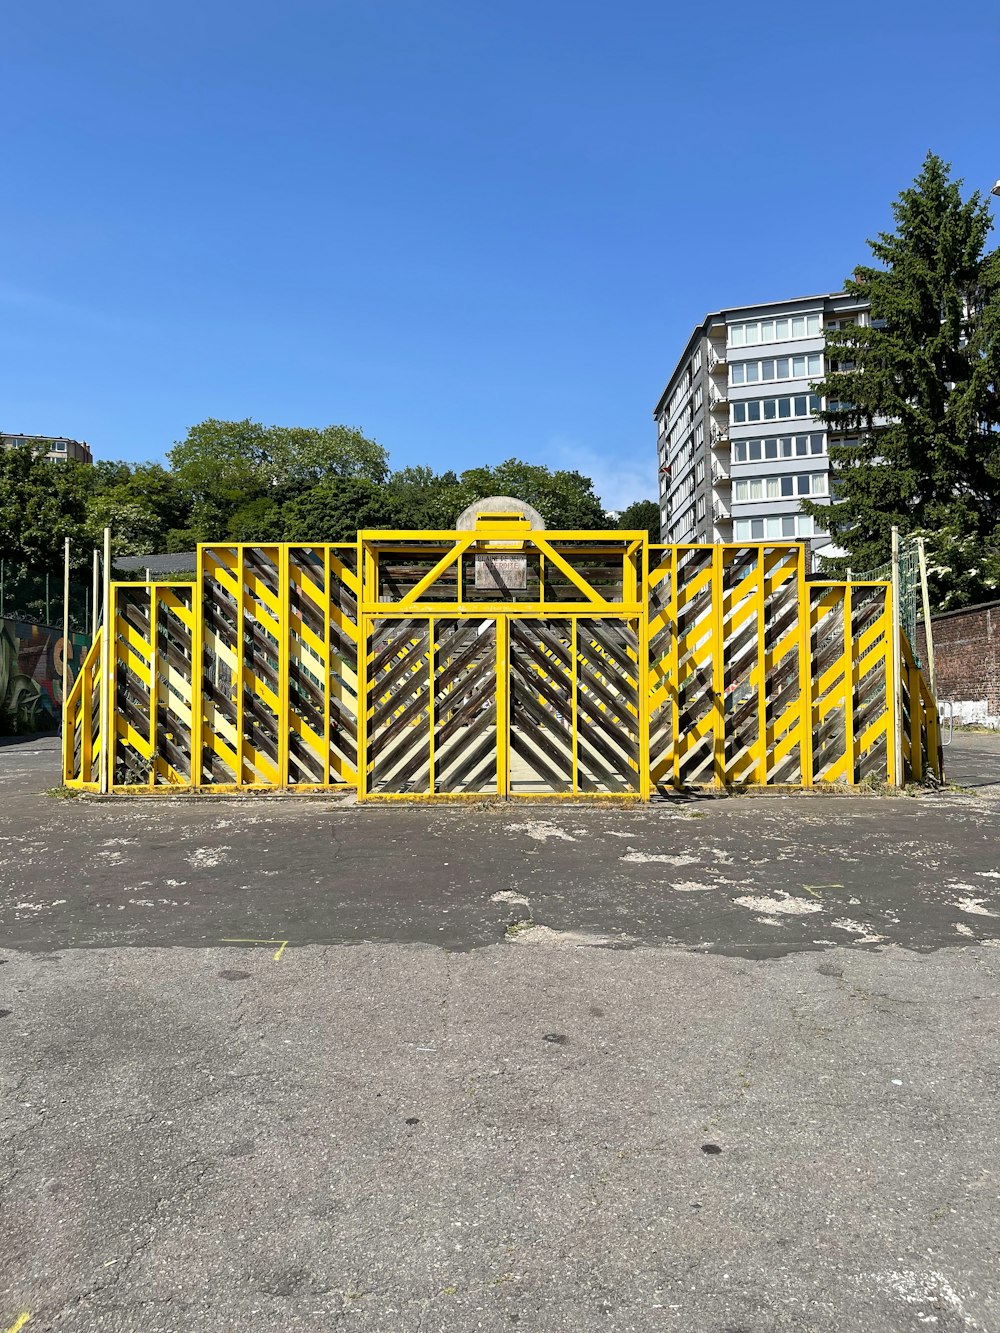 a yellow barricade sitting in the middle of a parking lot